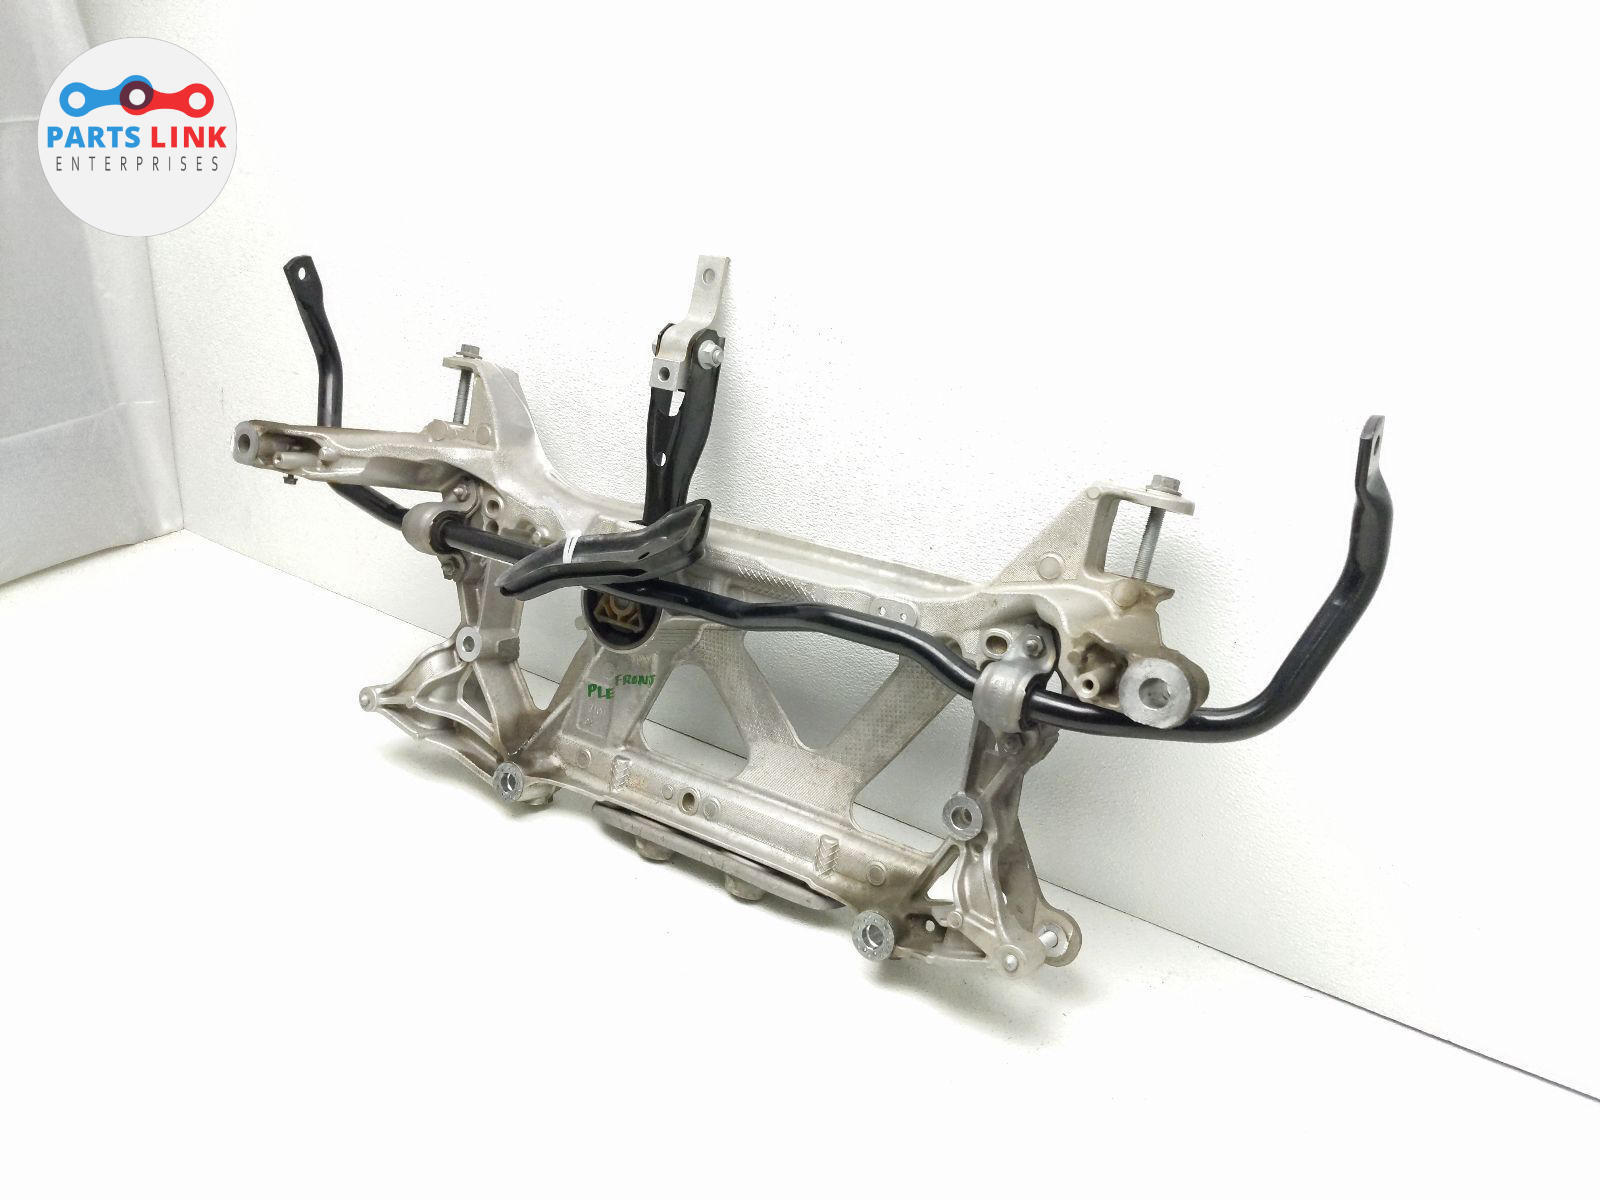 2022-23 AUDI RS3 FRONT CRADLE ENGINE CROSSMEMBER SUBFRAME SWAY BAR ASSEMBLY RS3